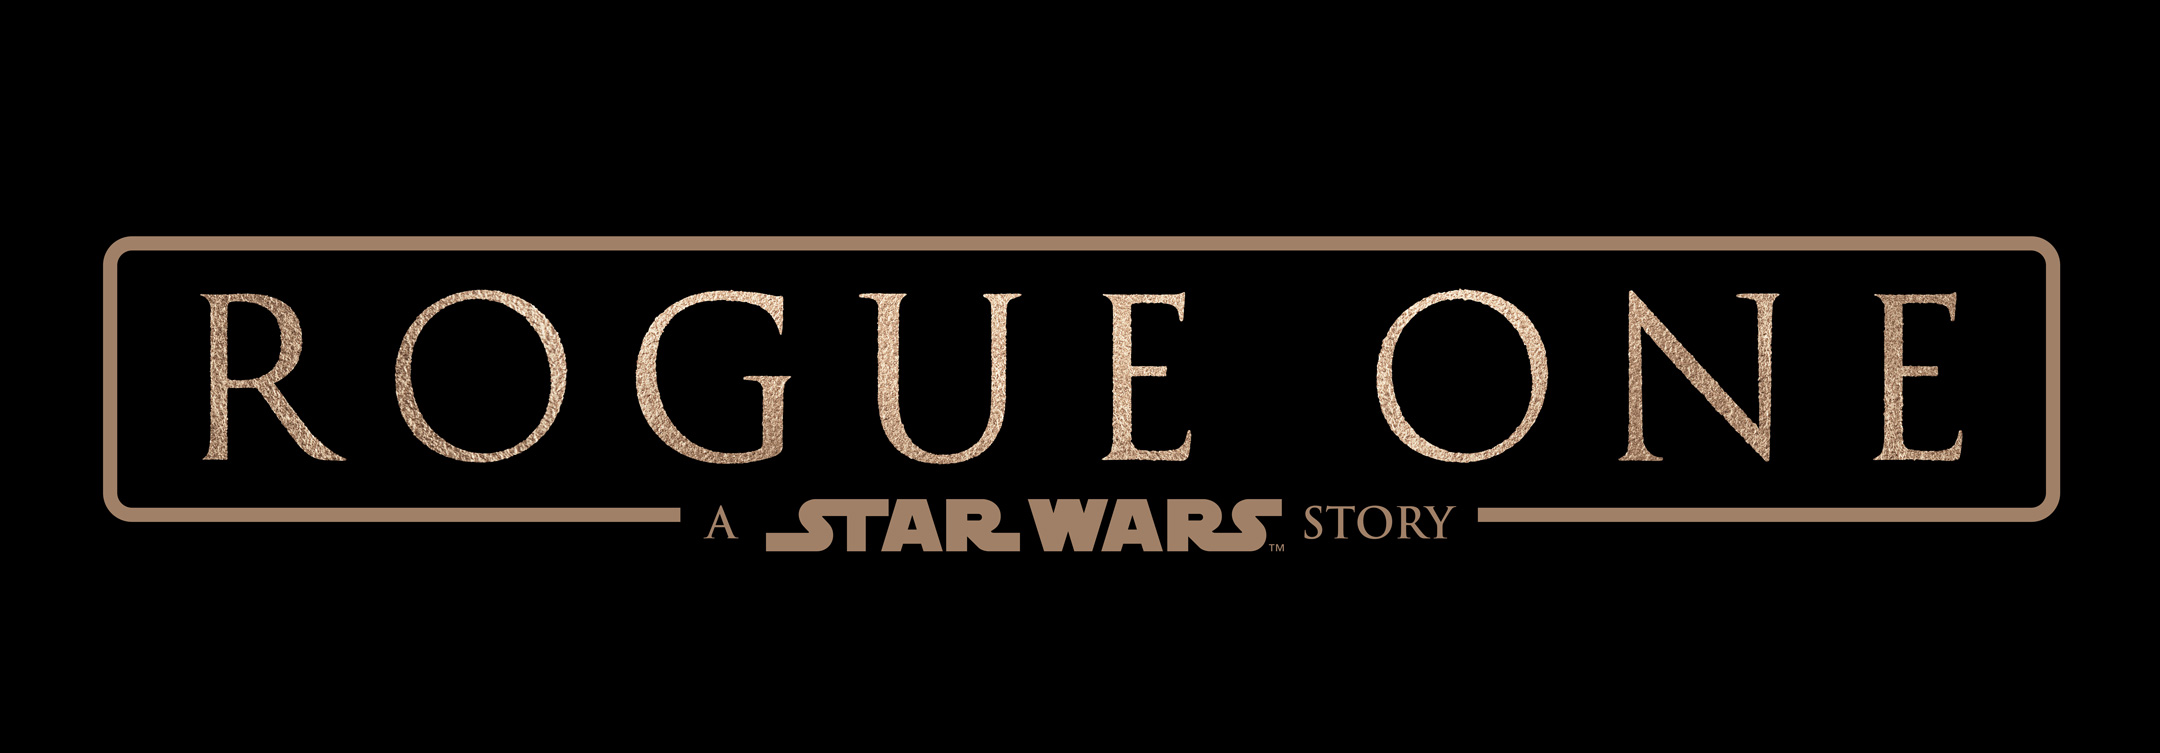 rogue-one-title-treatment